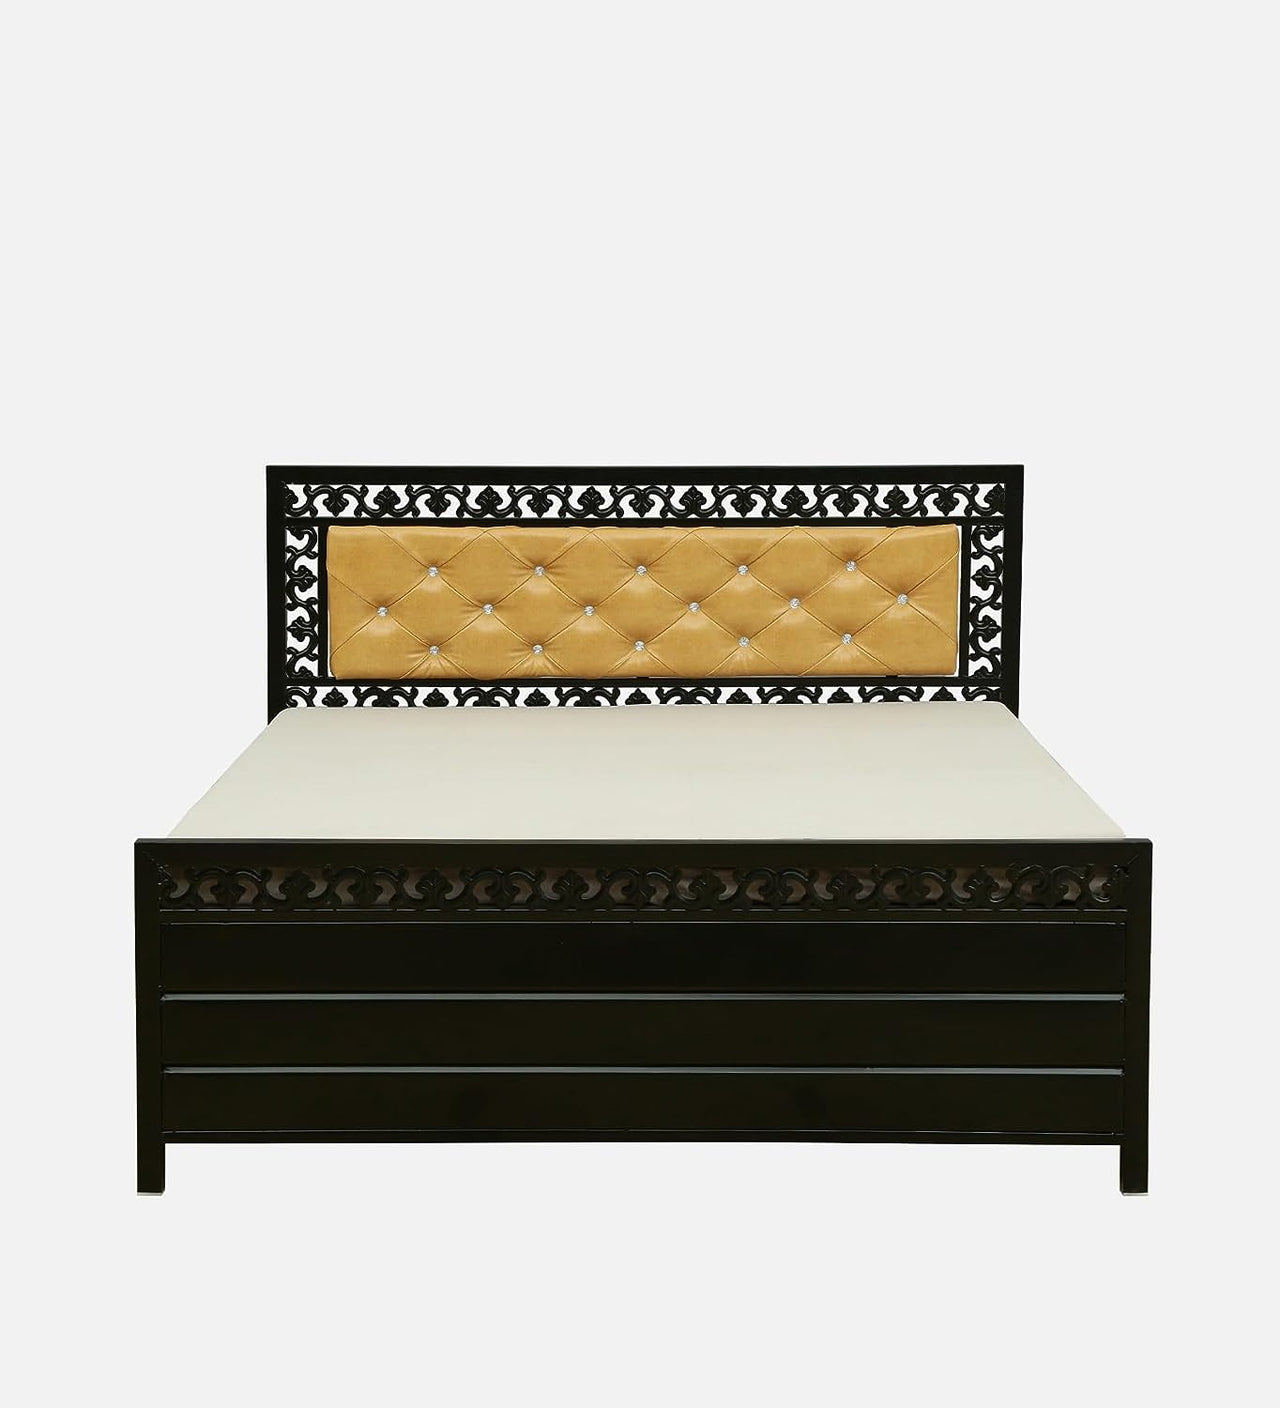 Cuba Hydraulic Storage King Metal Bed with Golden Cushion Headrest (Color - Black)